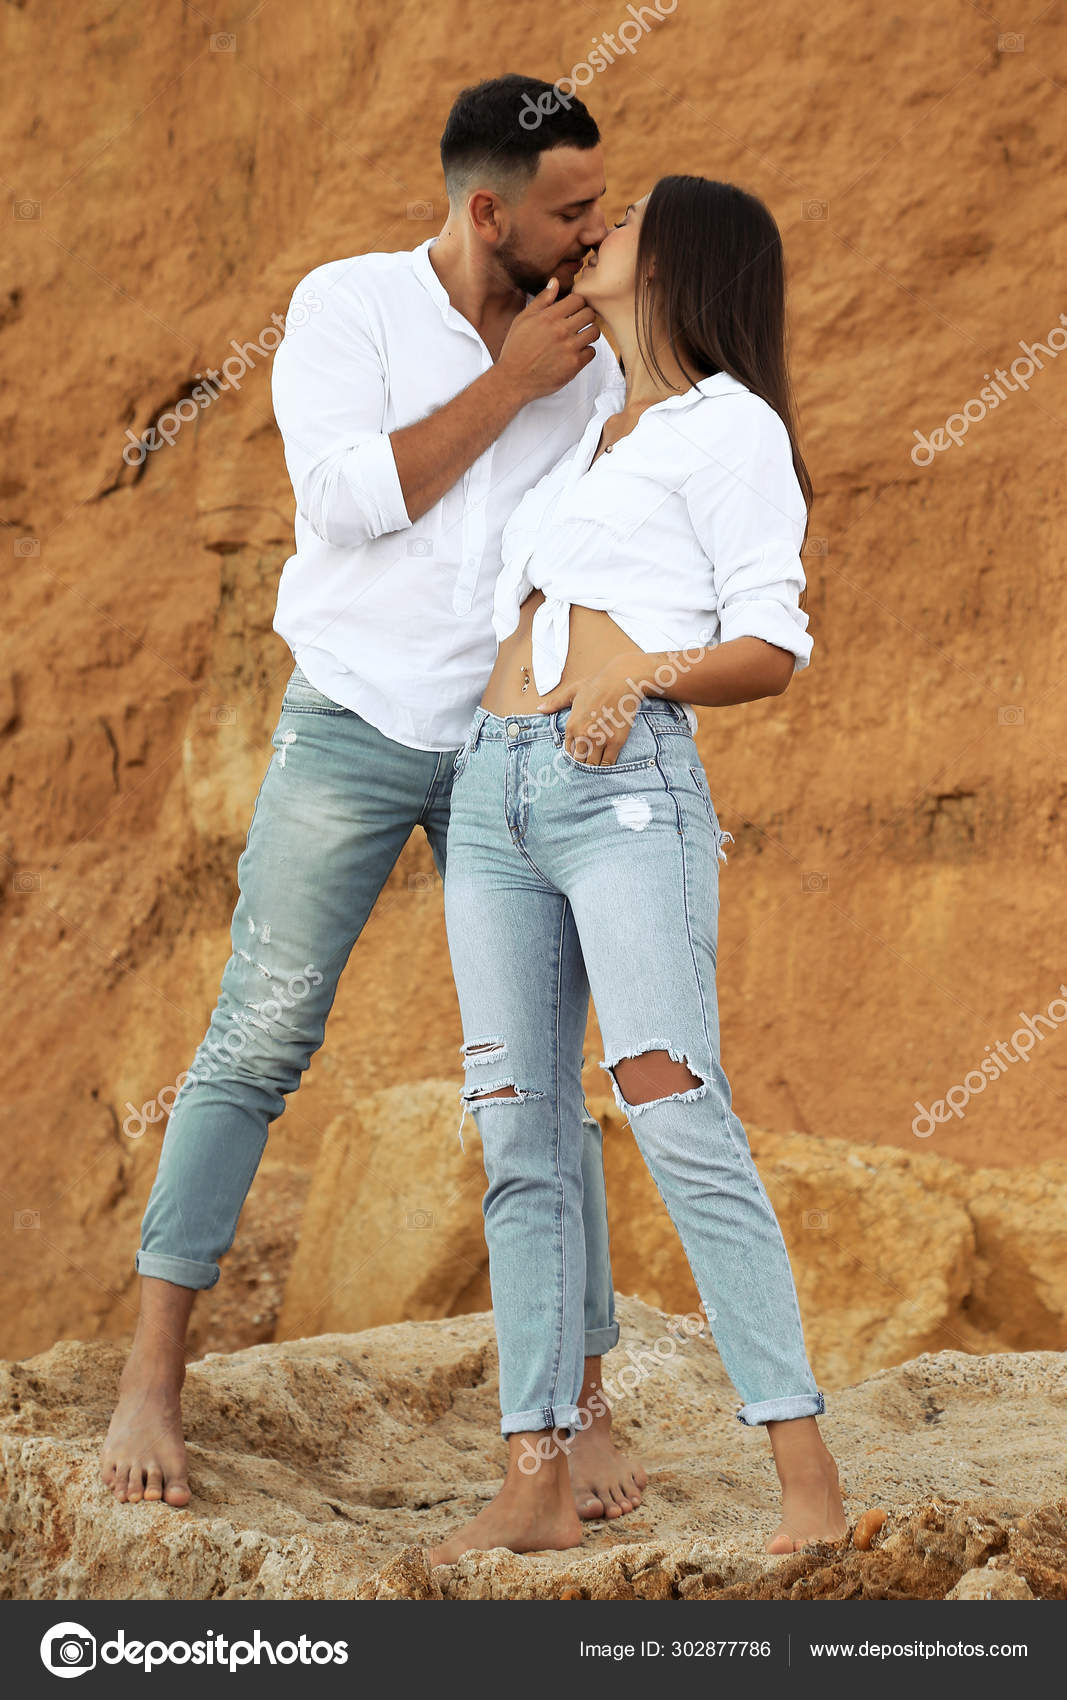 420+ Barefoot Female Feet In Jeans On The Beach Stock Photos, Pictures &  Royalty-Free Images - iStock